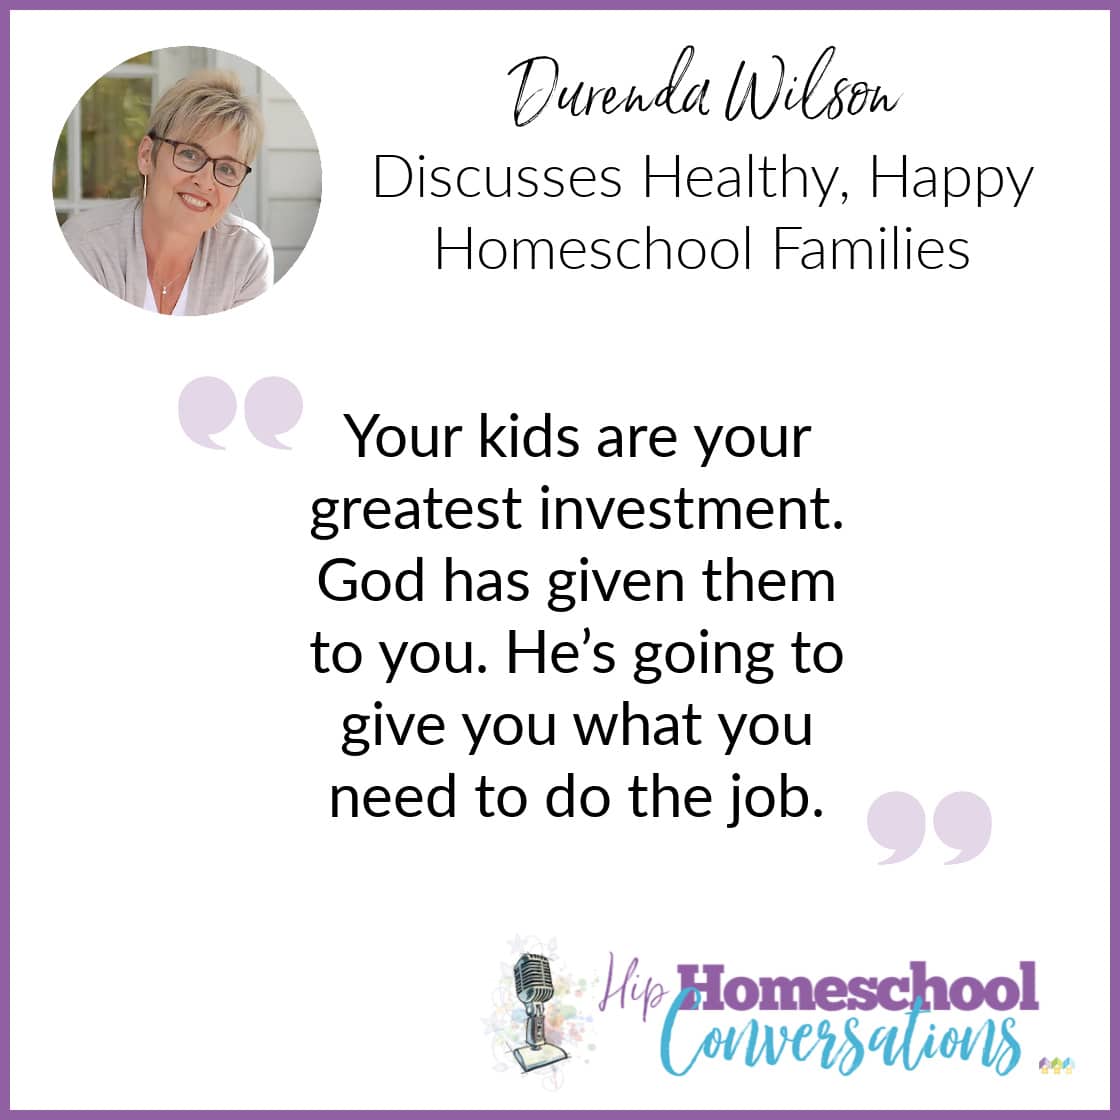 Join us to hear about Durenda’s belief in being the expert on your own children, her emphasis on flexible routines, and how fostering strong sibling relationships can all improve the homeschooling family life and, in fact, the culture around us.